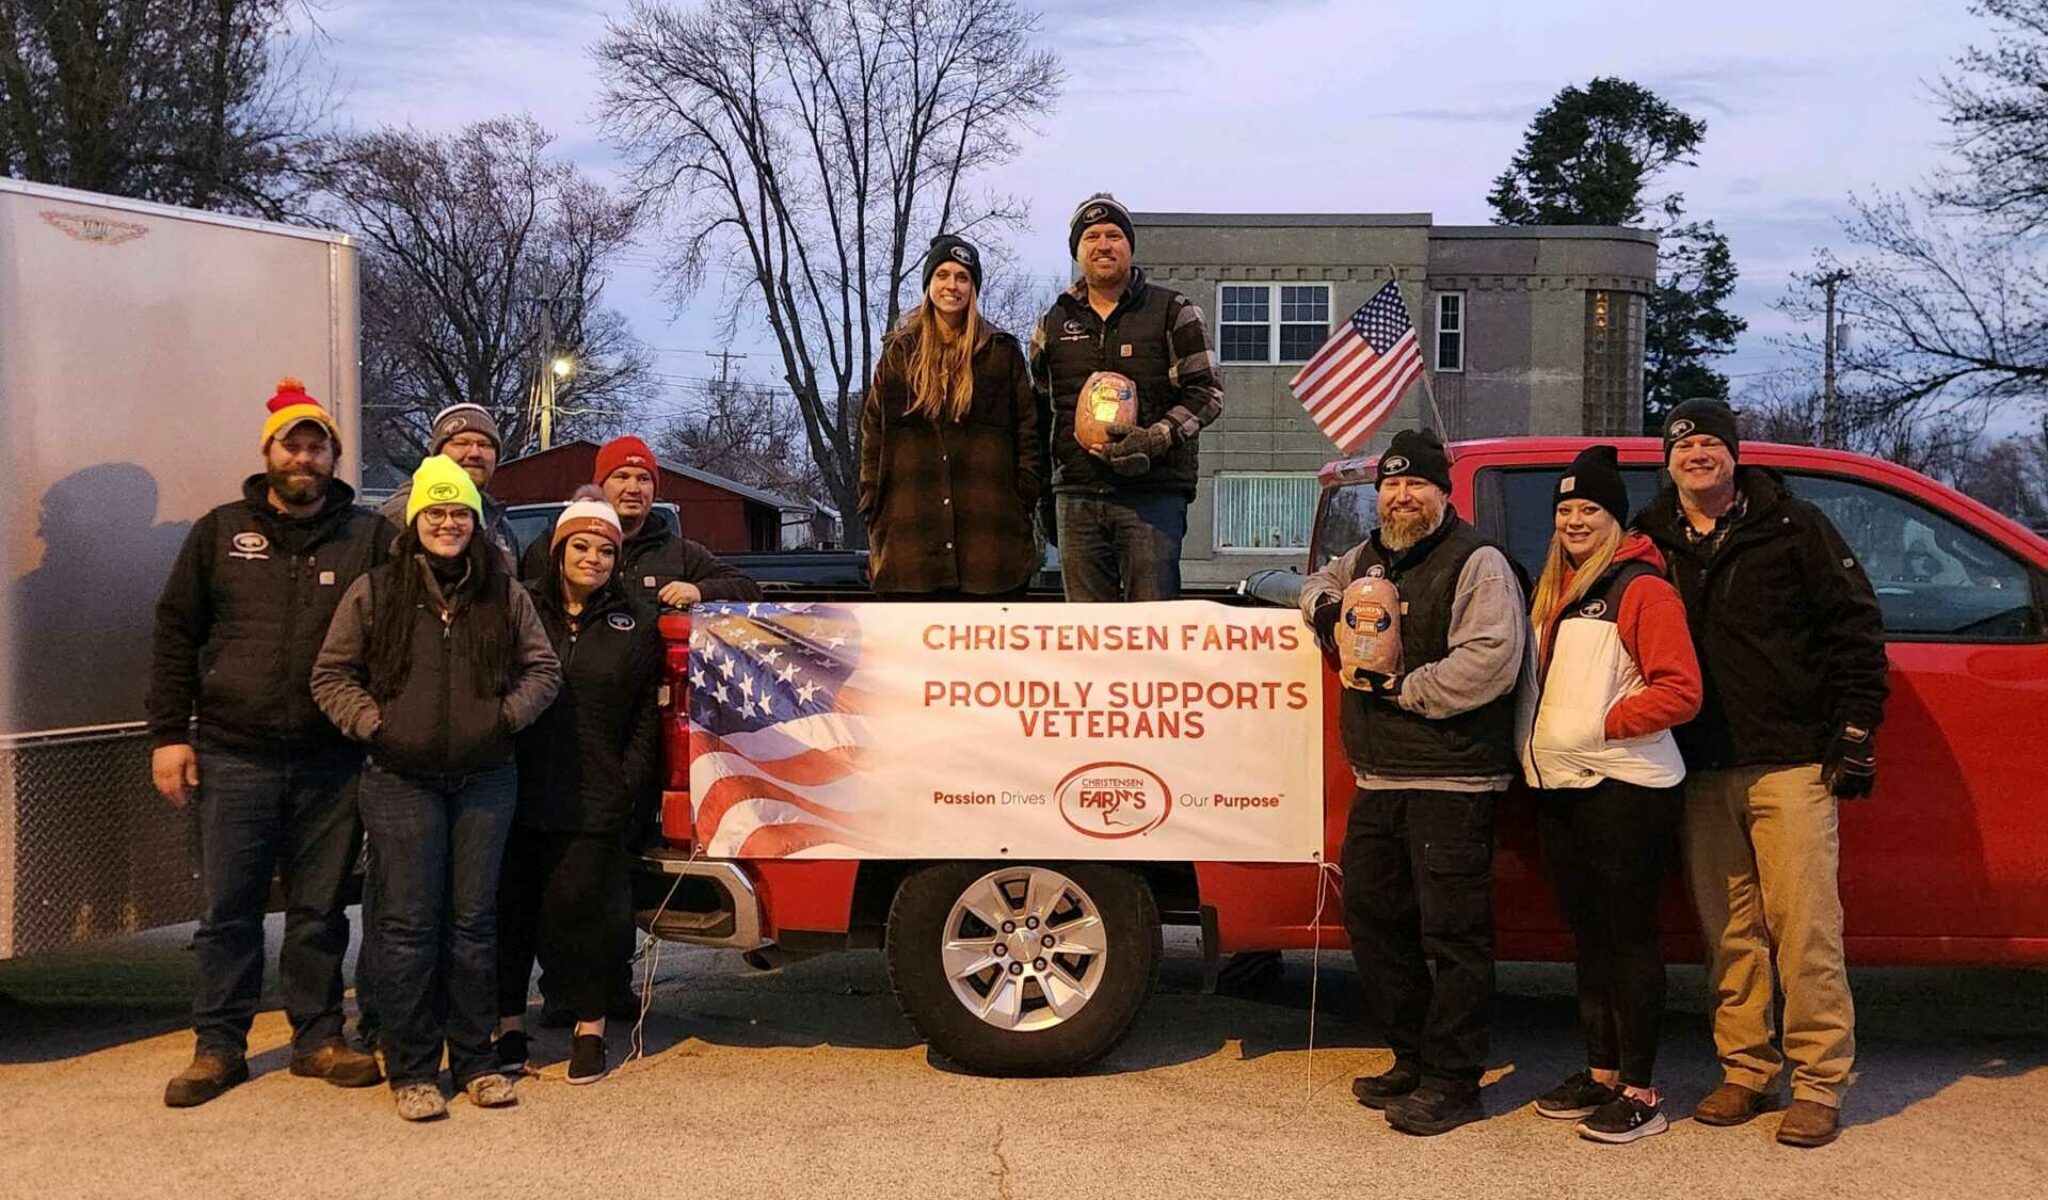 Over 500 Hams Donated to Hunting with Heroes on Veteran's Day